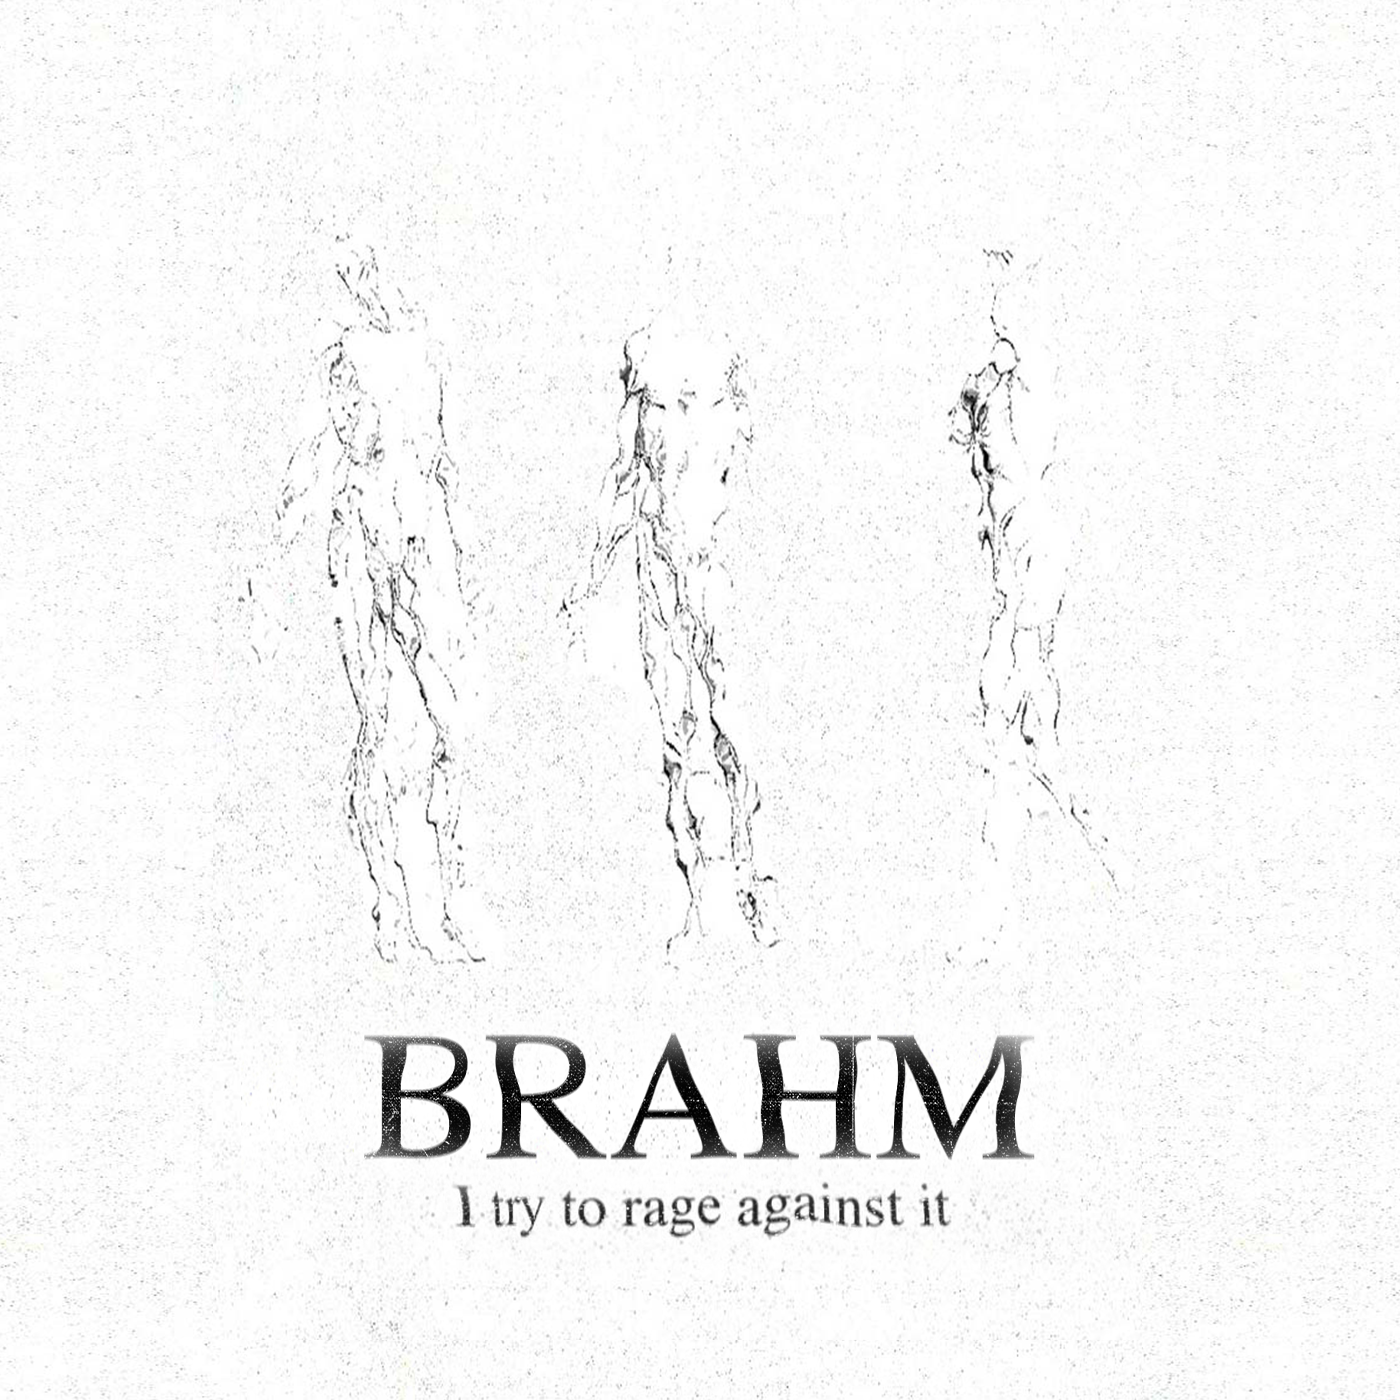 BRAHM - I try to rage against it (cassette/7" lathe)